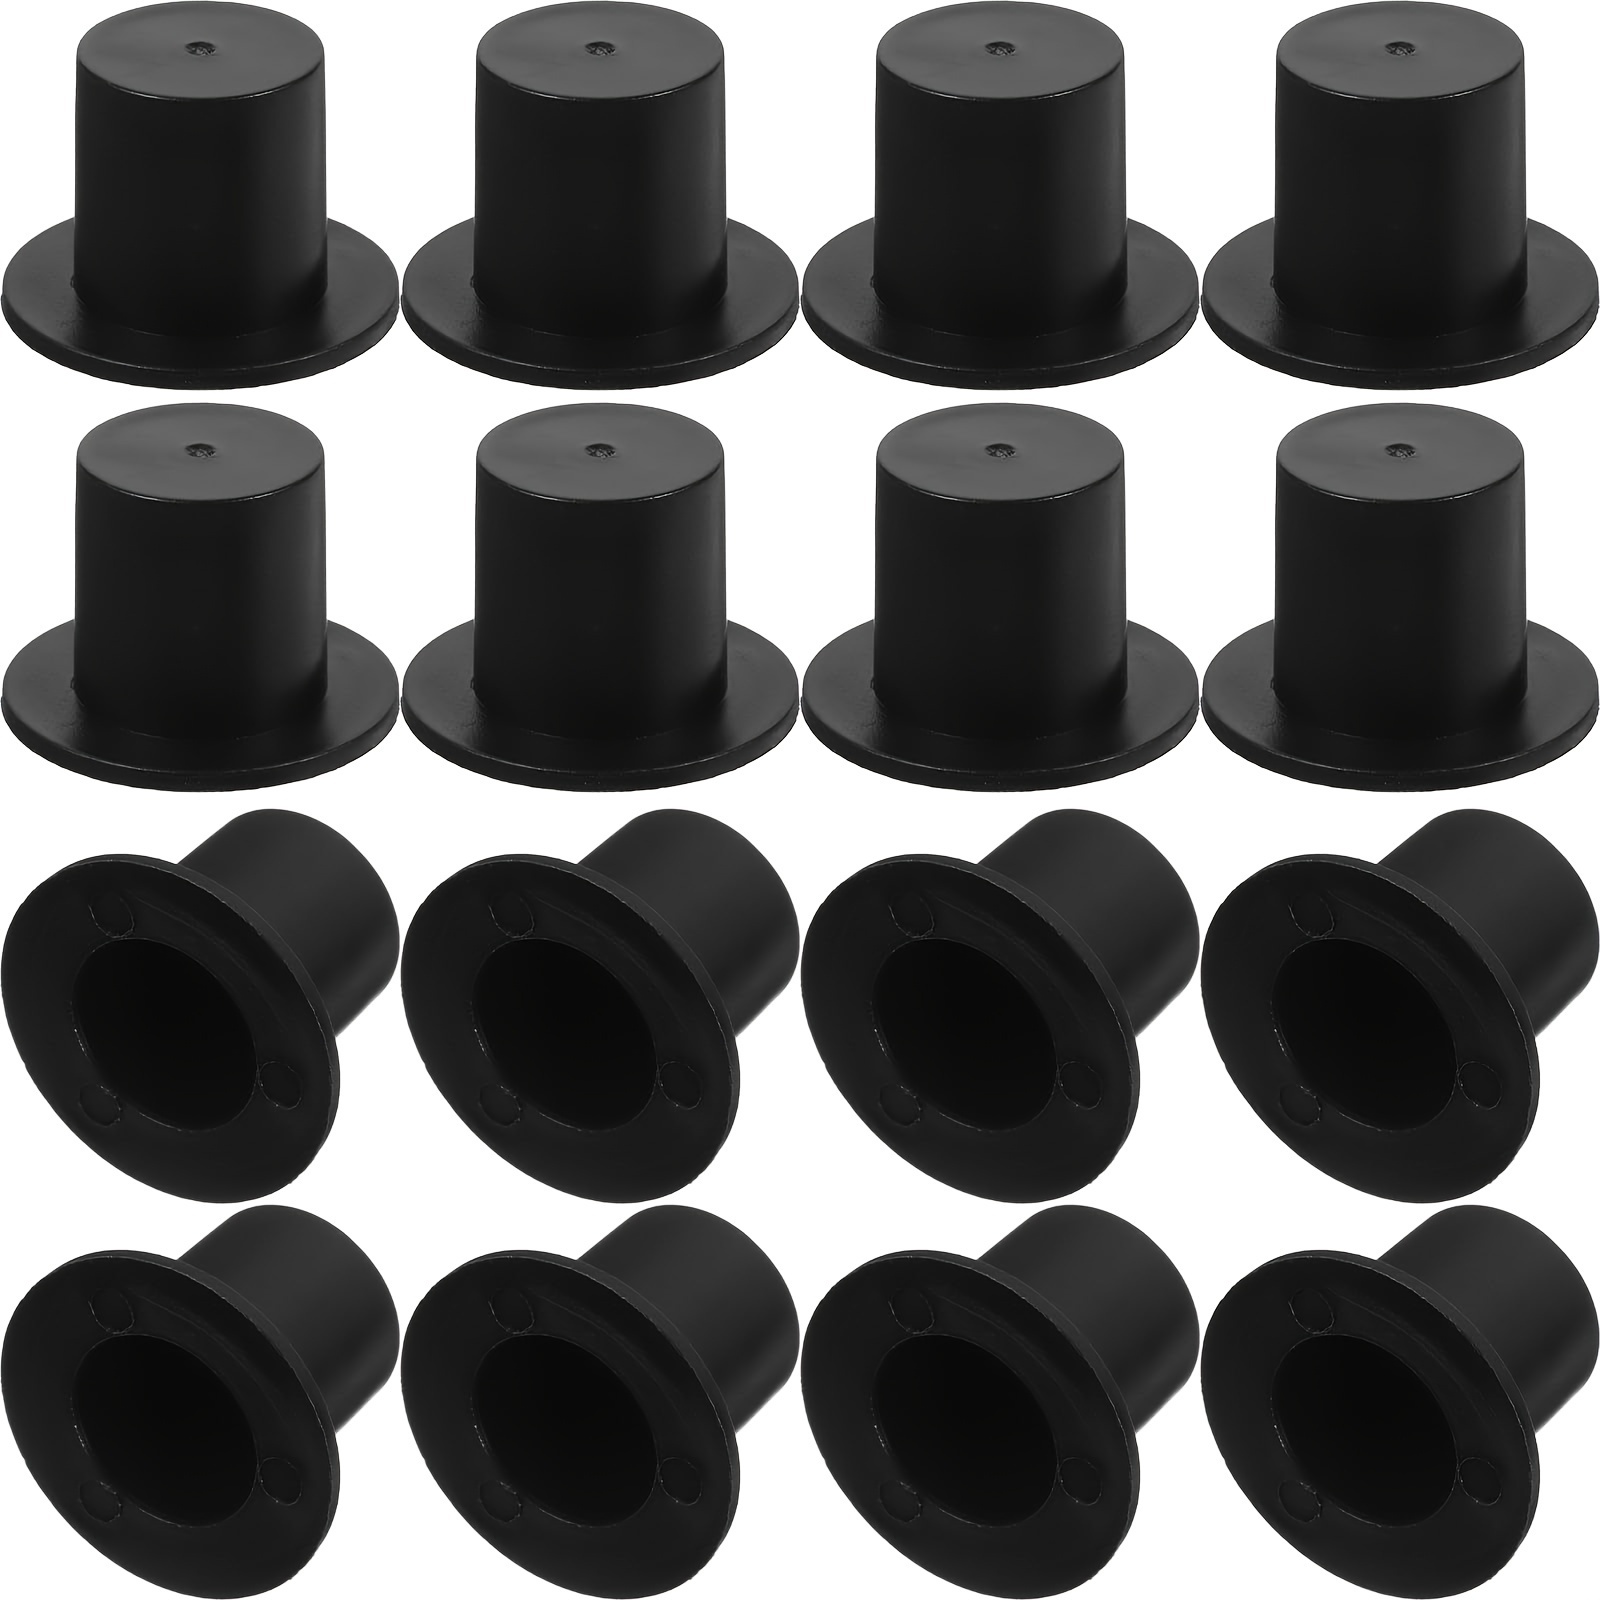 

20-pack Mini Top Hat Magician Party Decorations For All Seasons, Gentleman's Hat For Christmas Snowman Decor, No Battery Or Electricity Needed, Featherless - Assorted Colors